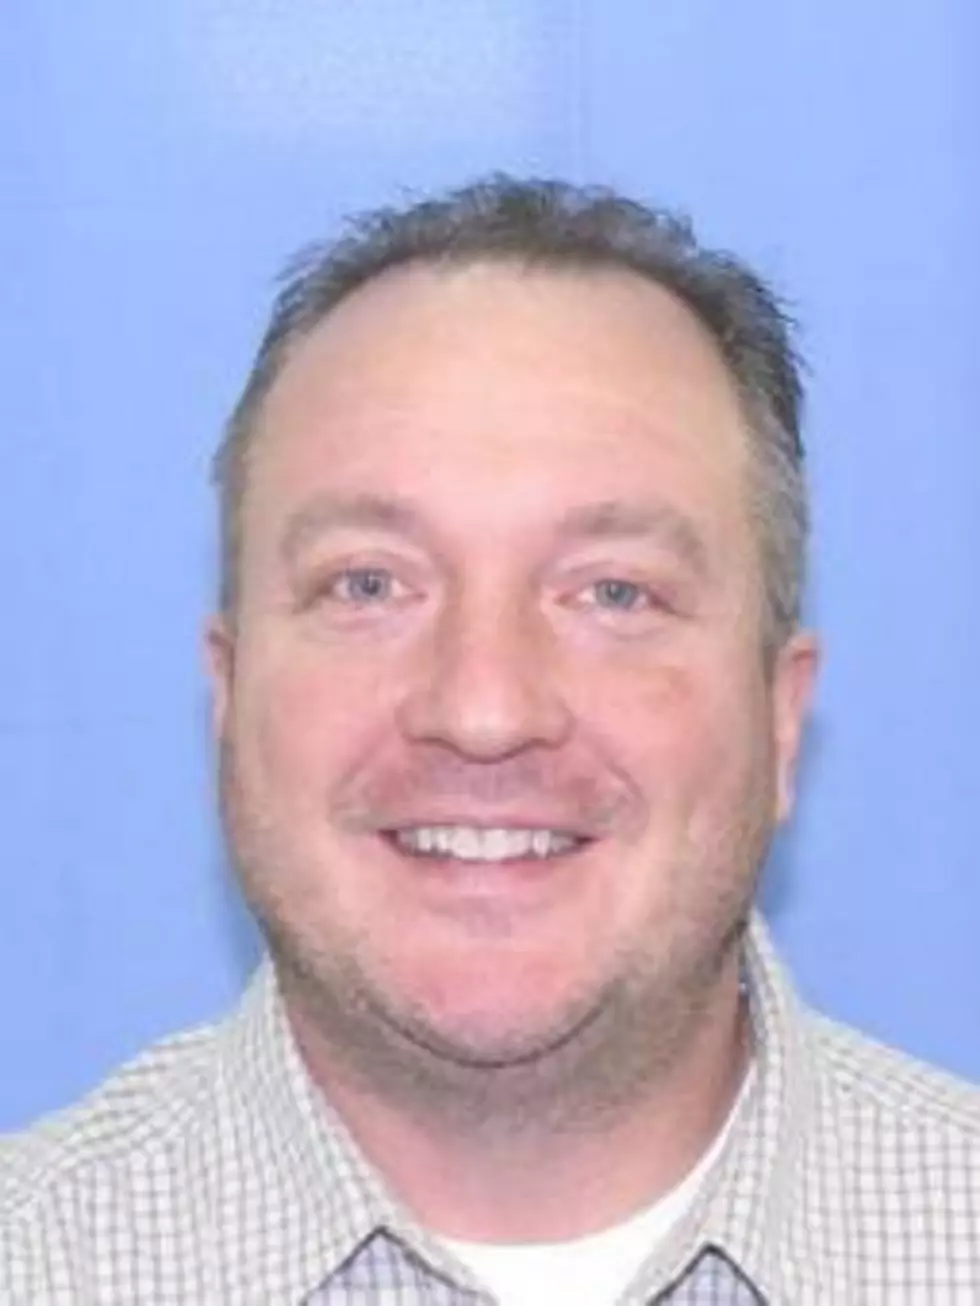 Wayne County Pennsylvania Man is Reported Missing